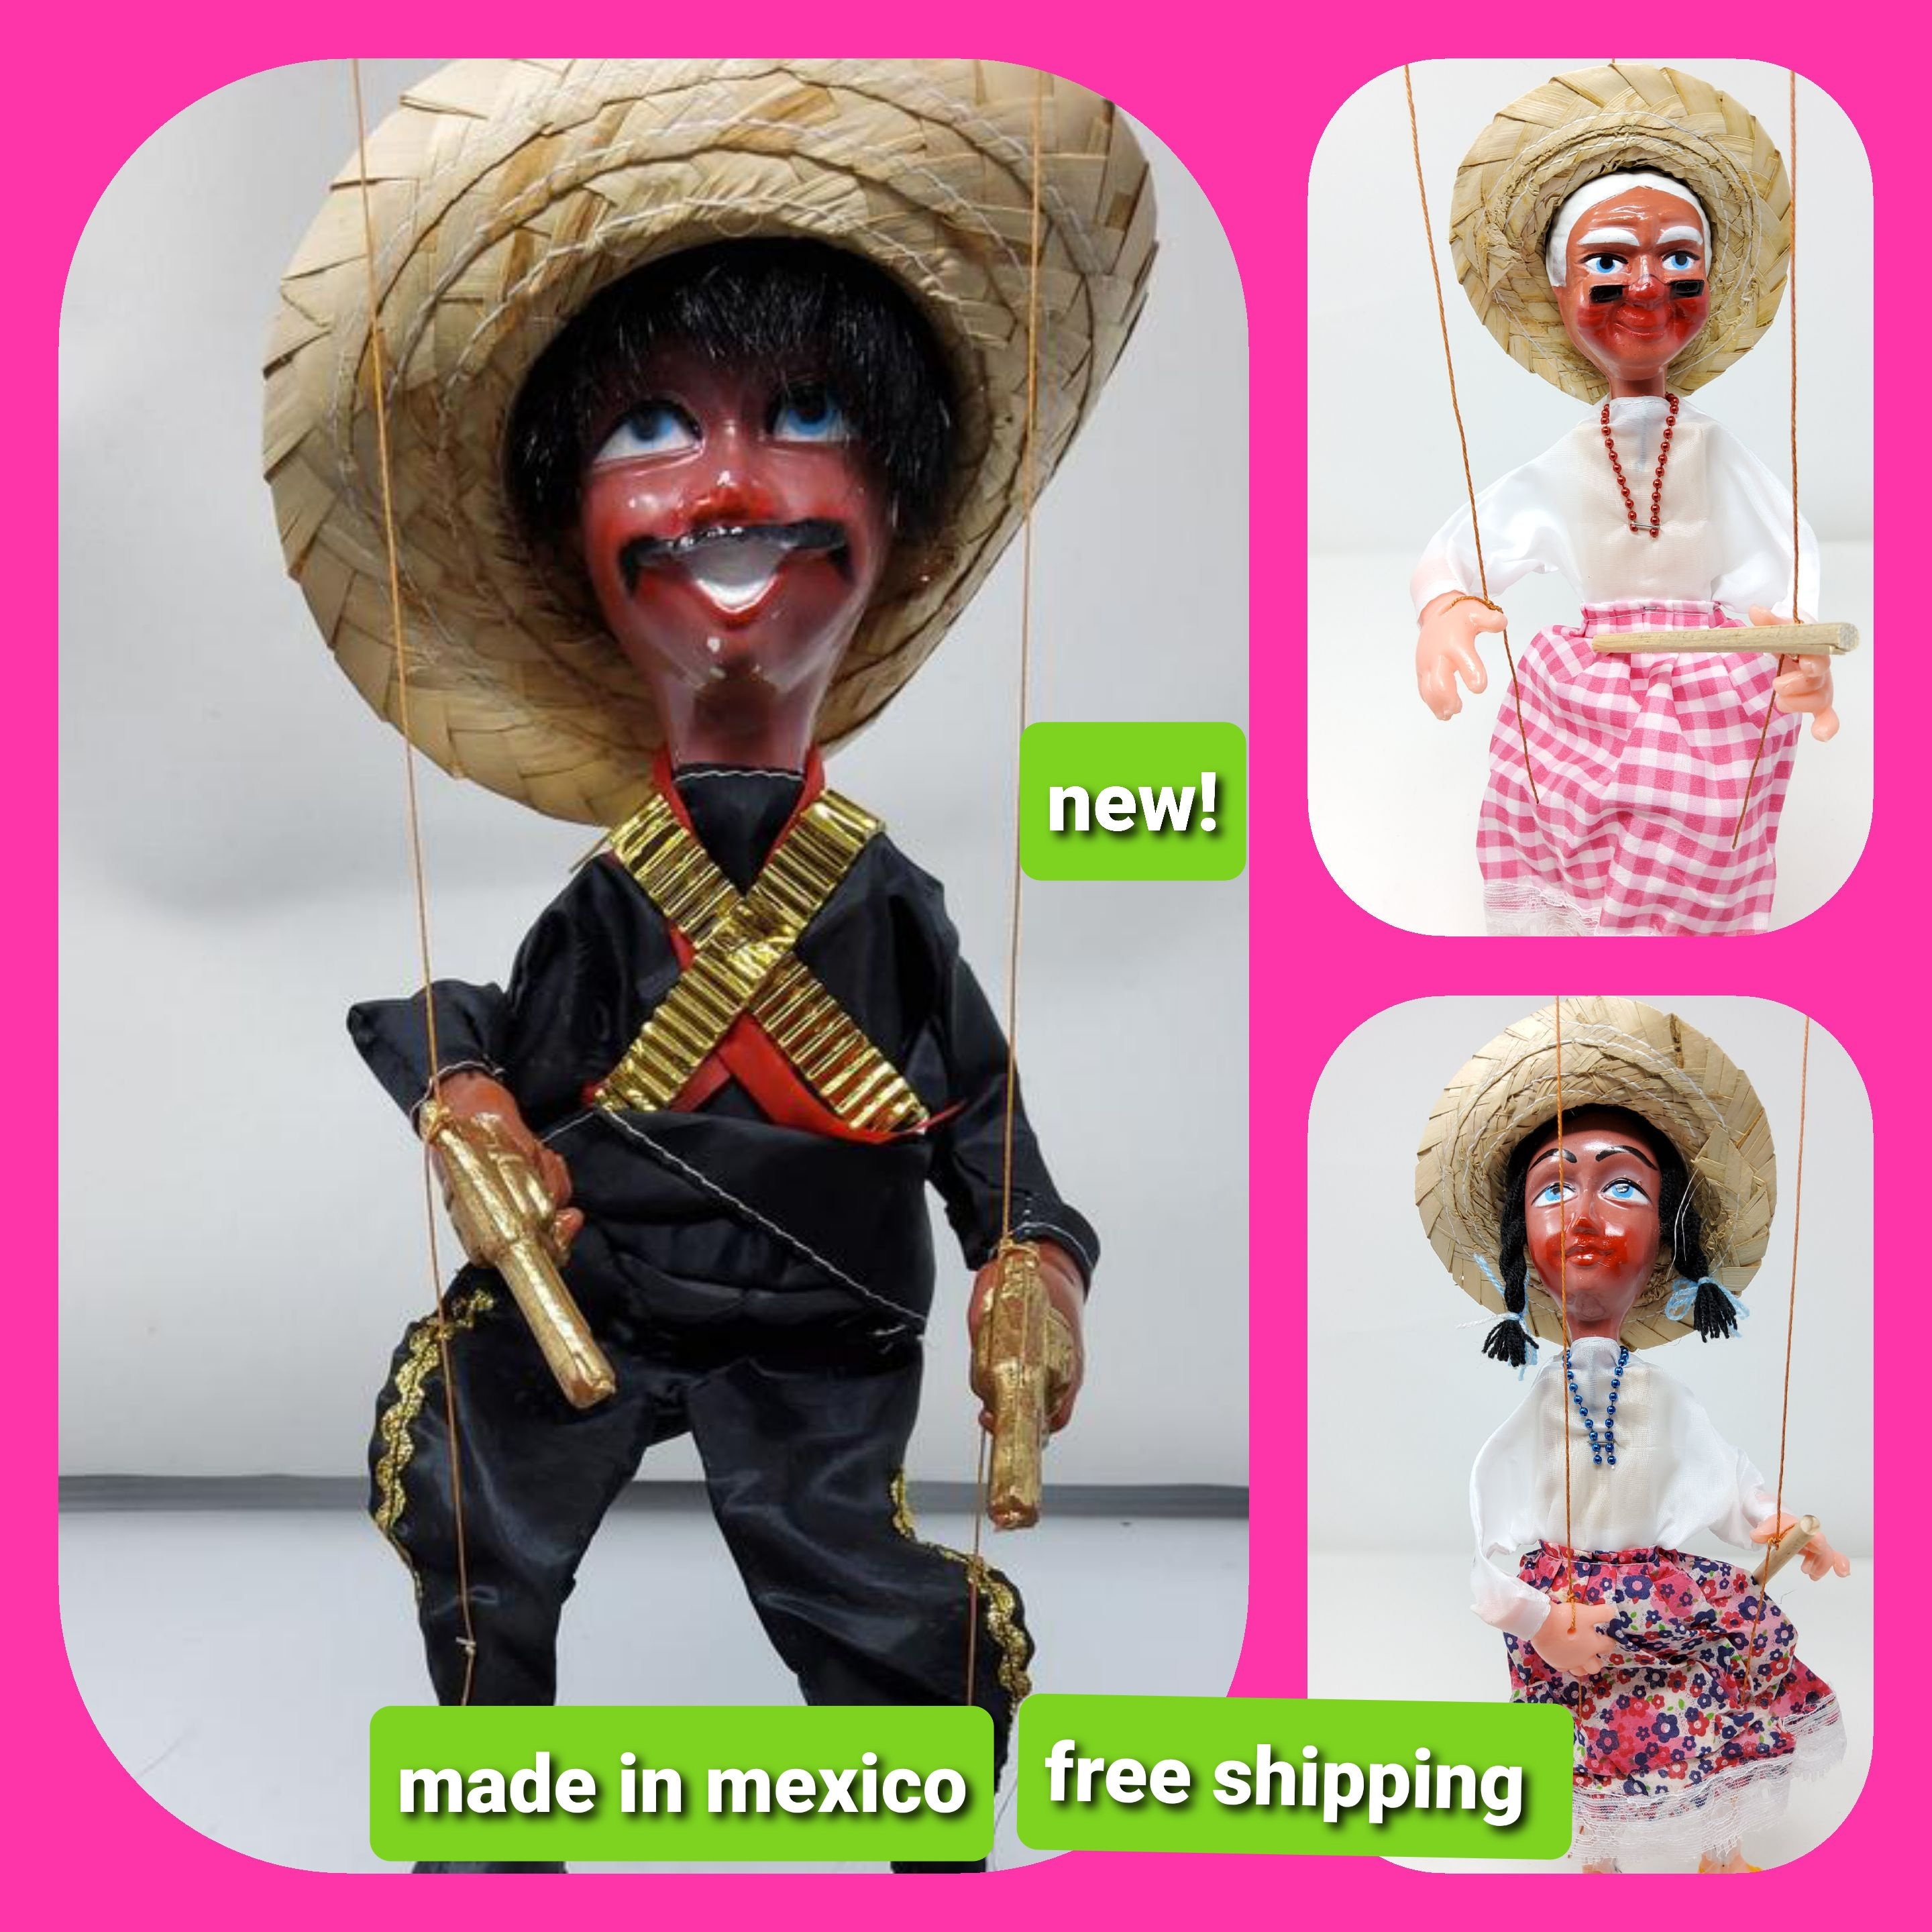 Marionette - Mexican Fiesta Party Decorations and Supplies